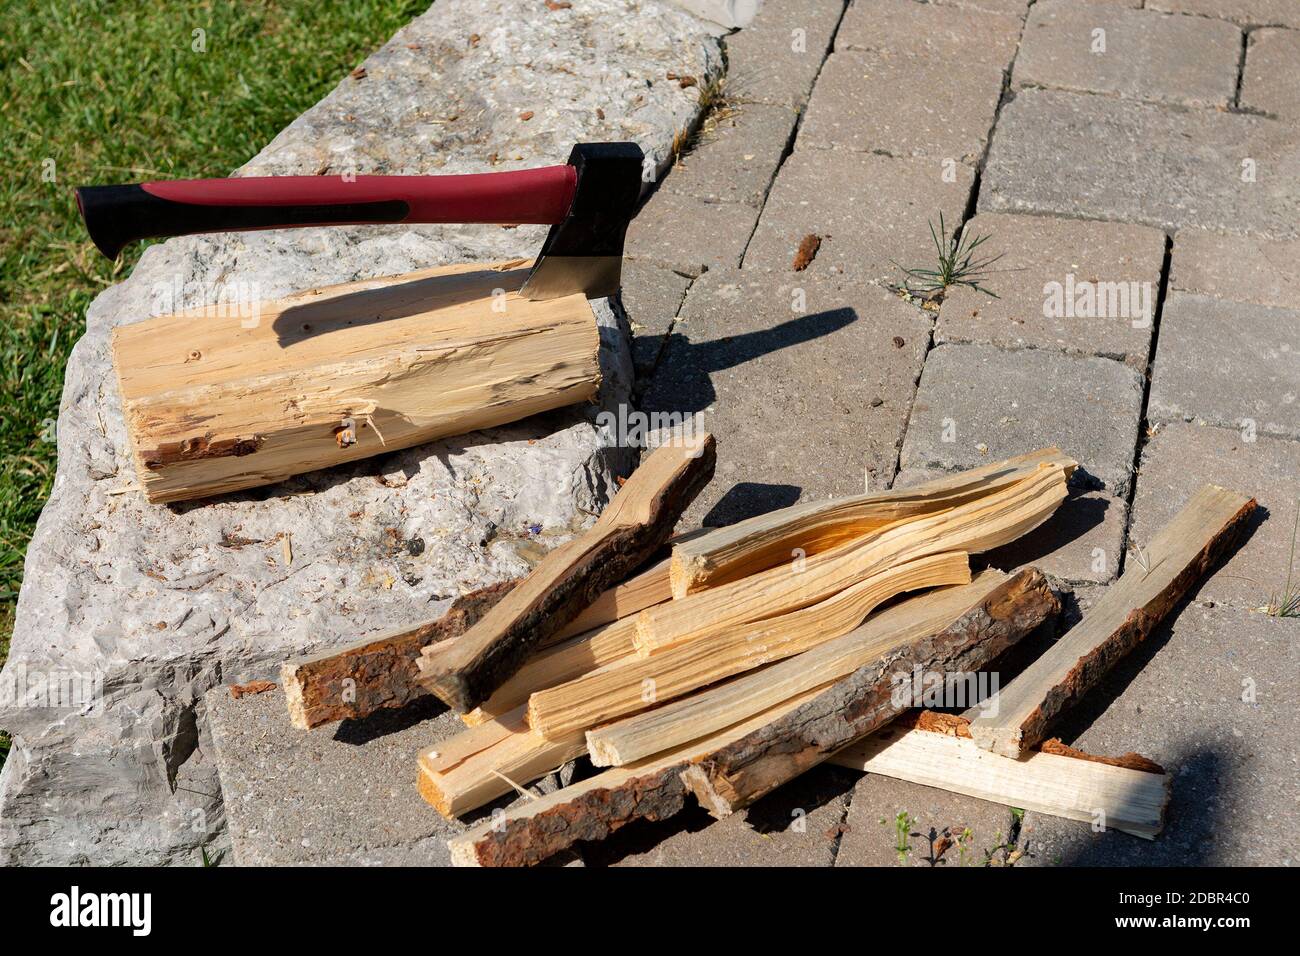 An ax and a pile of chopped firewood for a bonfire Stock Photo